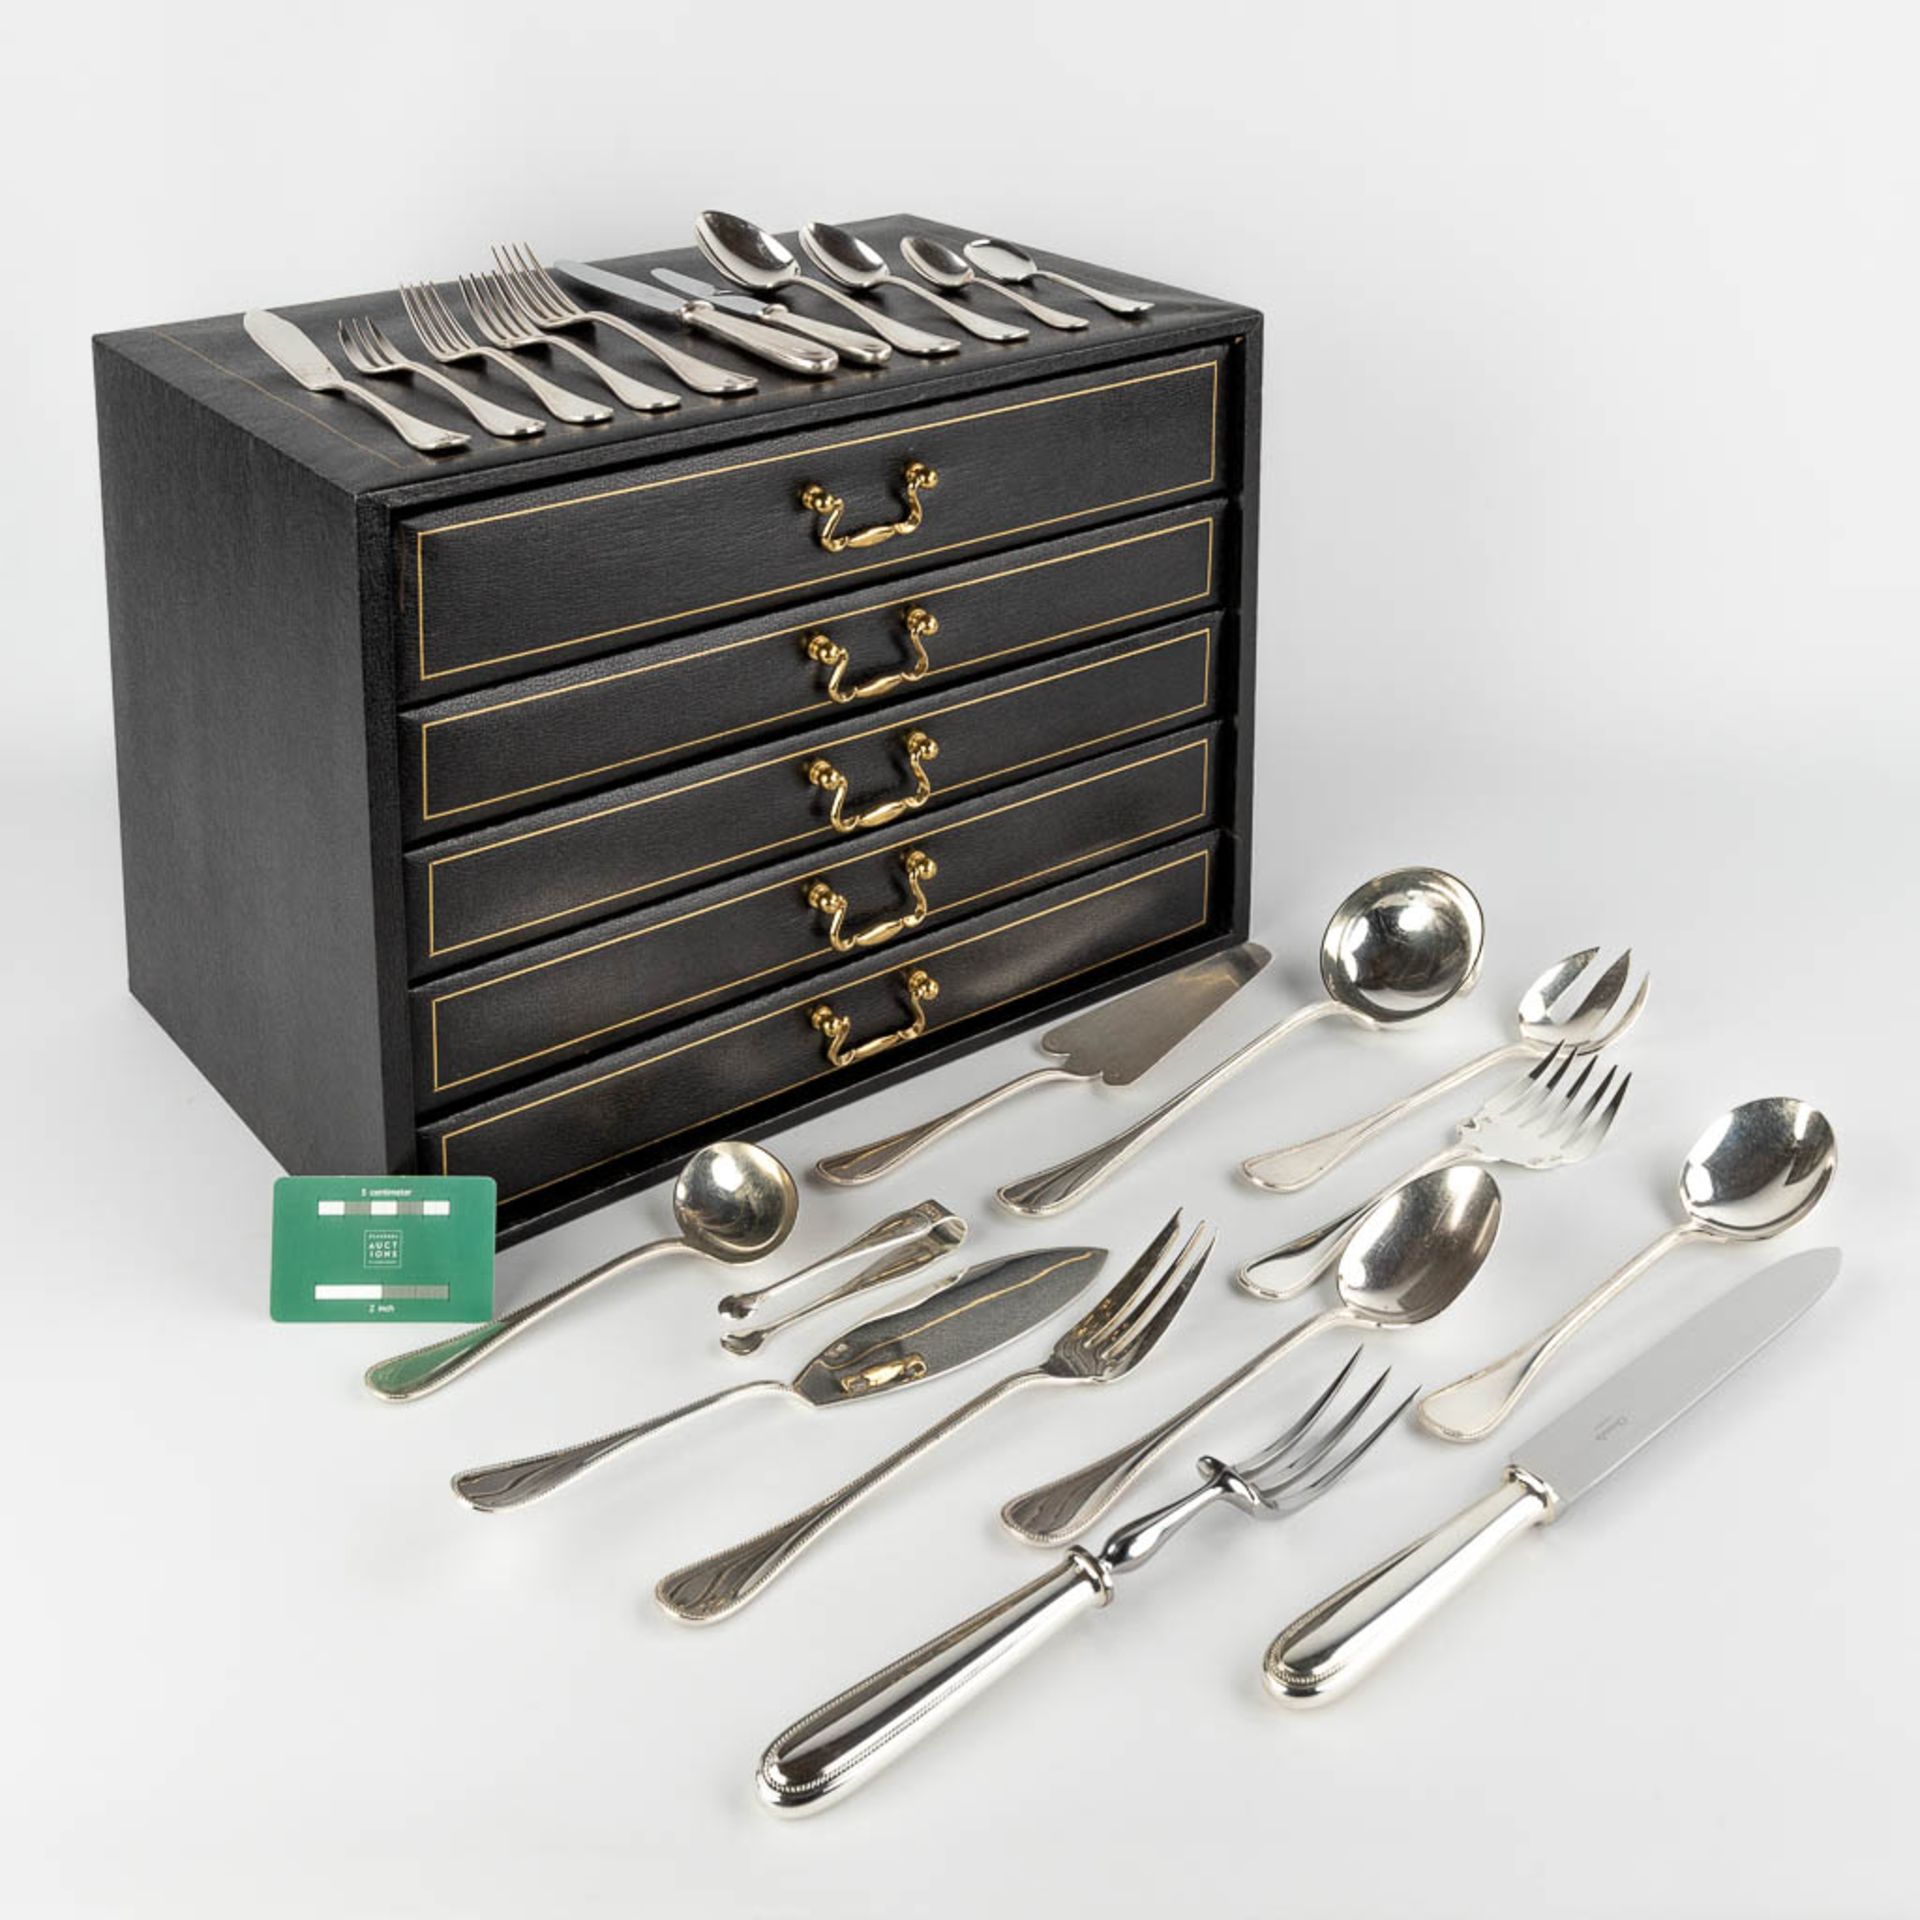 Christofle 'Perles' a large silver-plated cutlery in a storage box. 144 pieces. (D:29 x W:46 x H:33 - Image 2 of 21